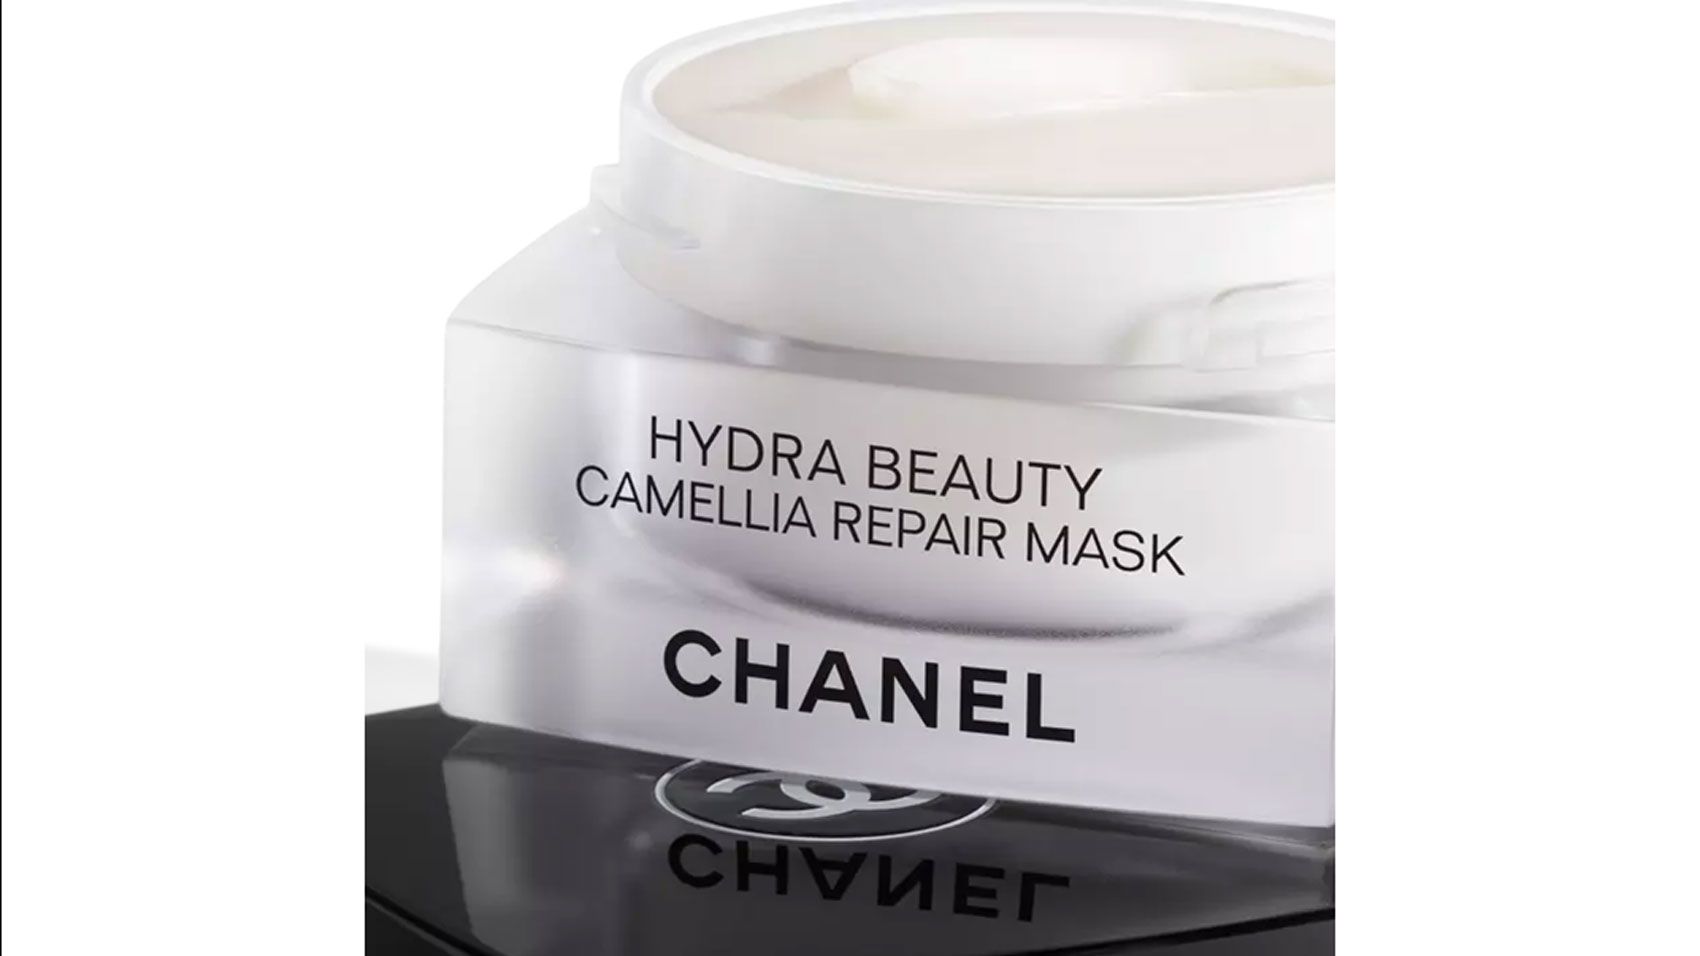 Review: A Month Of CHANEL's Hydra Beauty Skincare Range